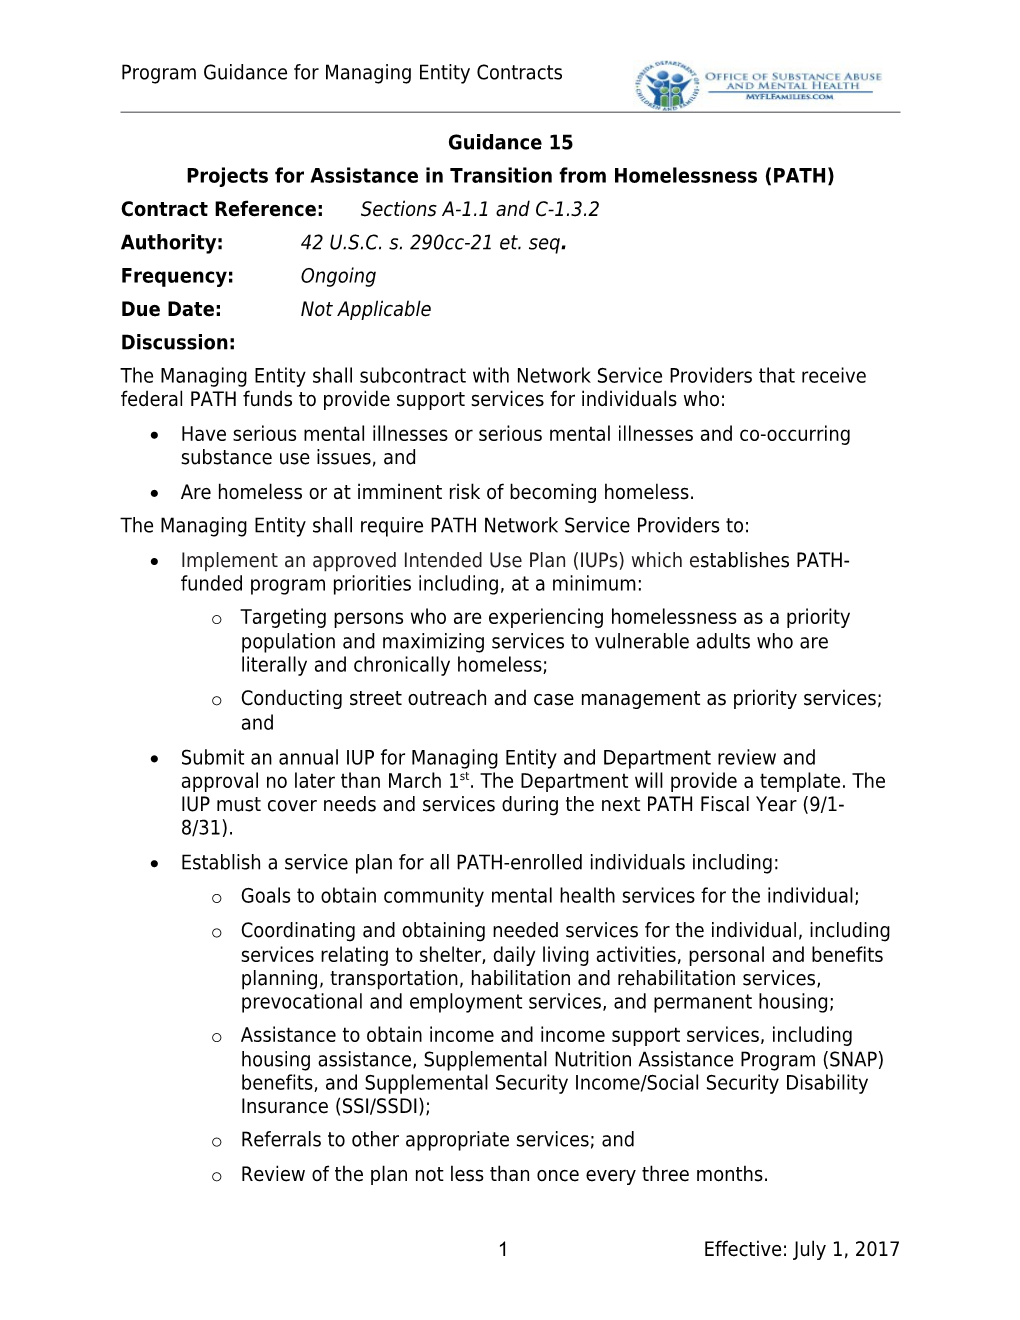 Projects for Assistance in Transition from Homelessness (PATH)